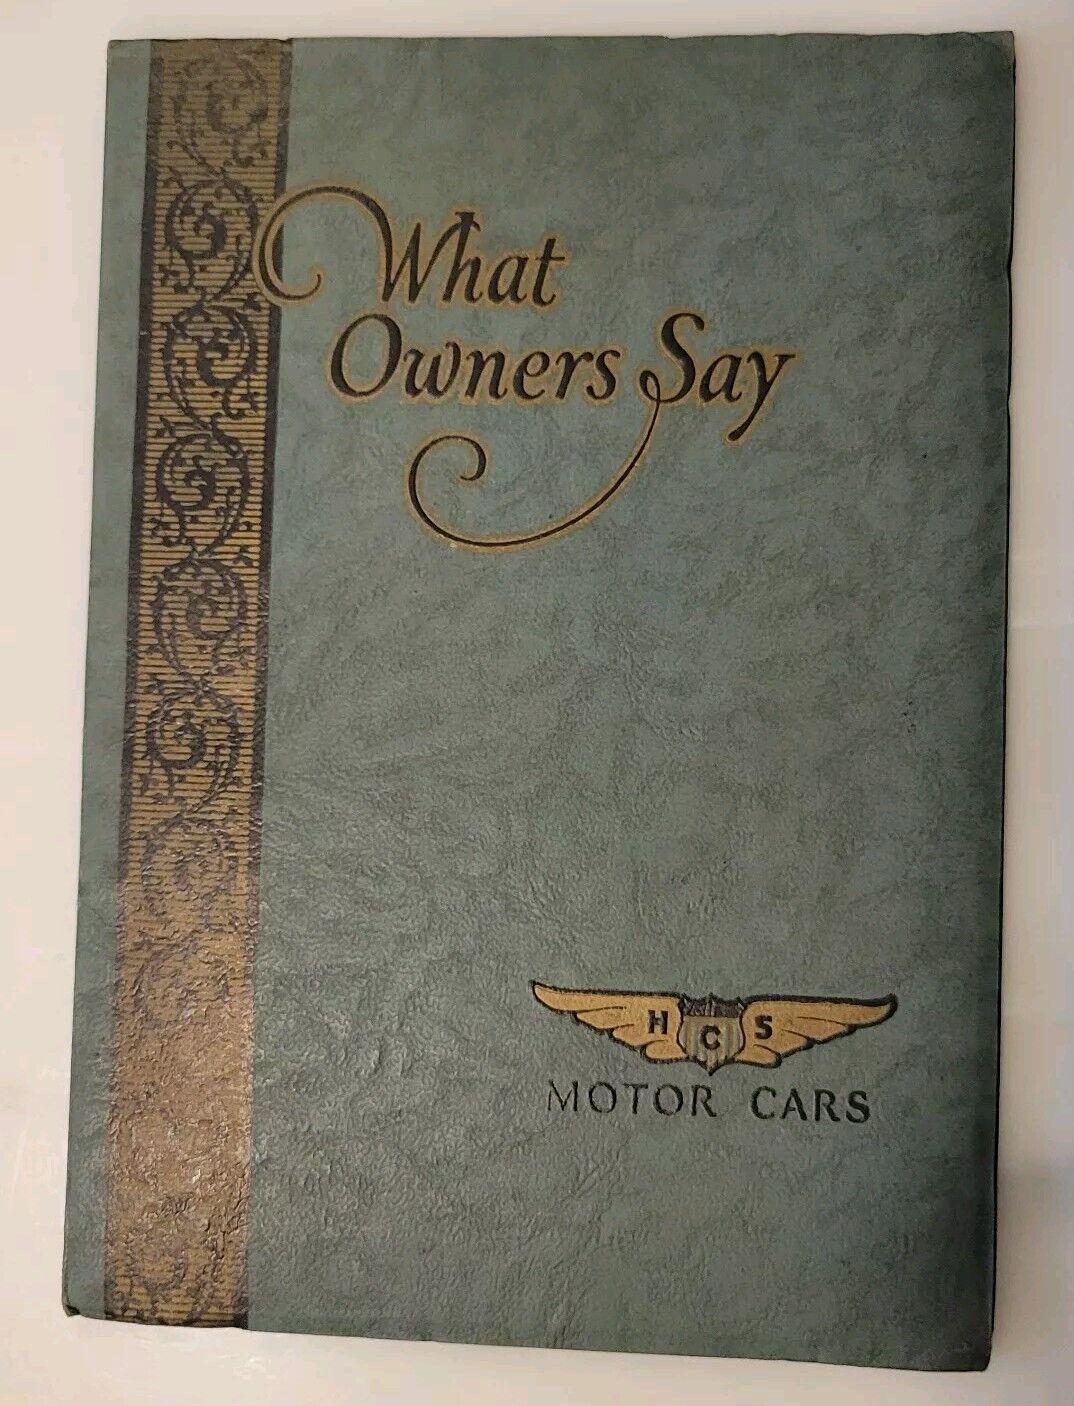 Ultra RARE Antique Original 1923 H.C.S. Book No Better What Owners Say STUTZ Car